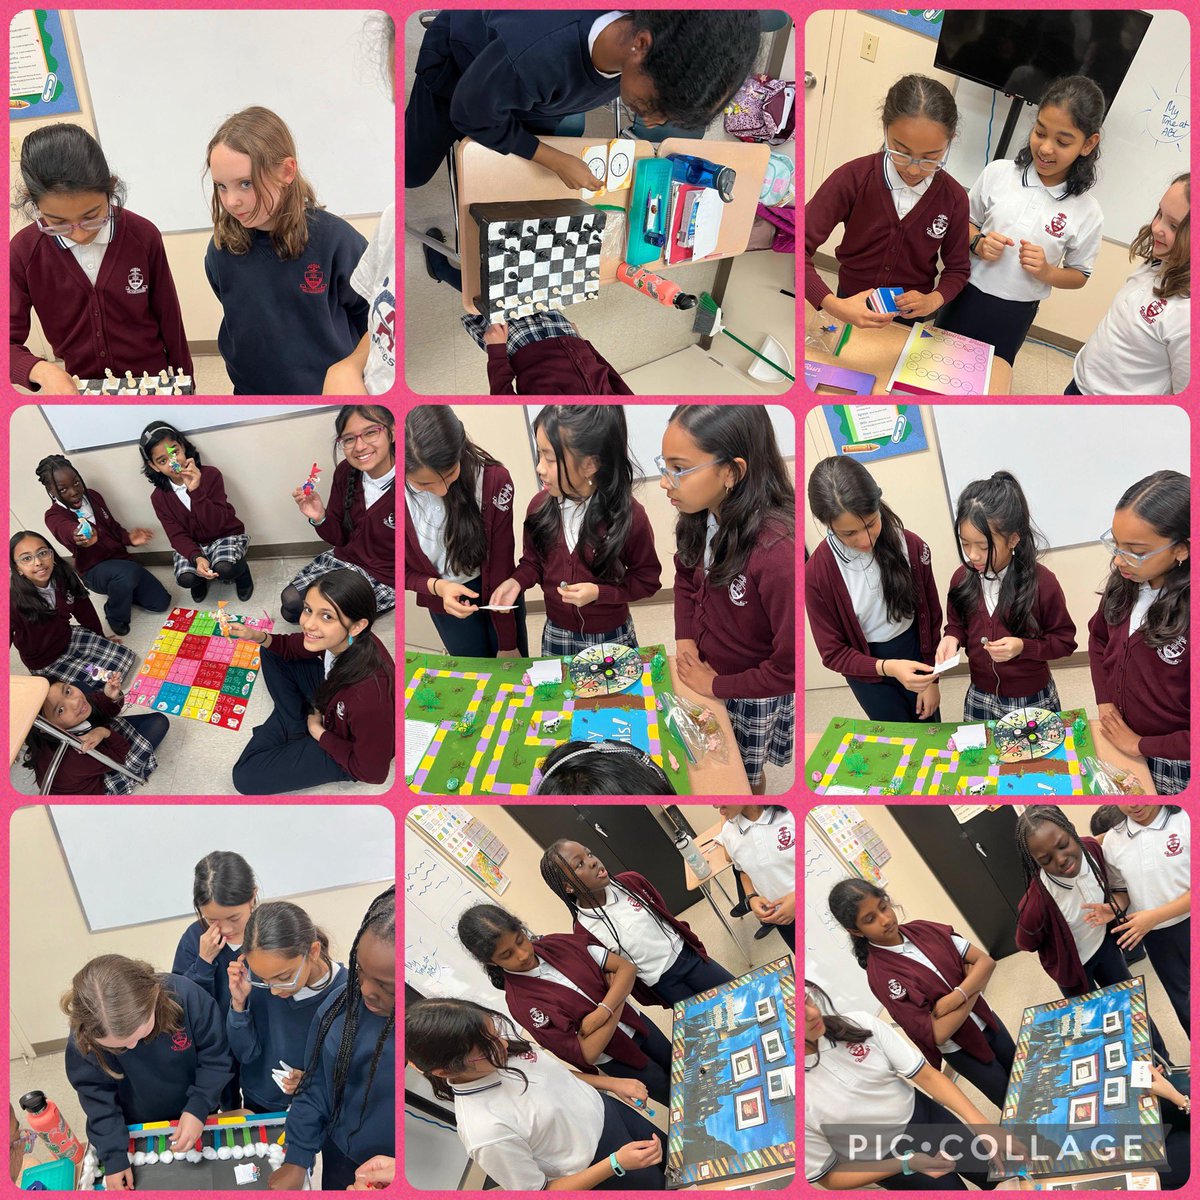 Grade 4 and 5 students presented their board games in which they used mathematics concepts learned in class this year! #School2024 #mississaugaschools #schoolisfun #mathisfun